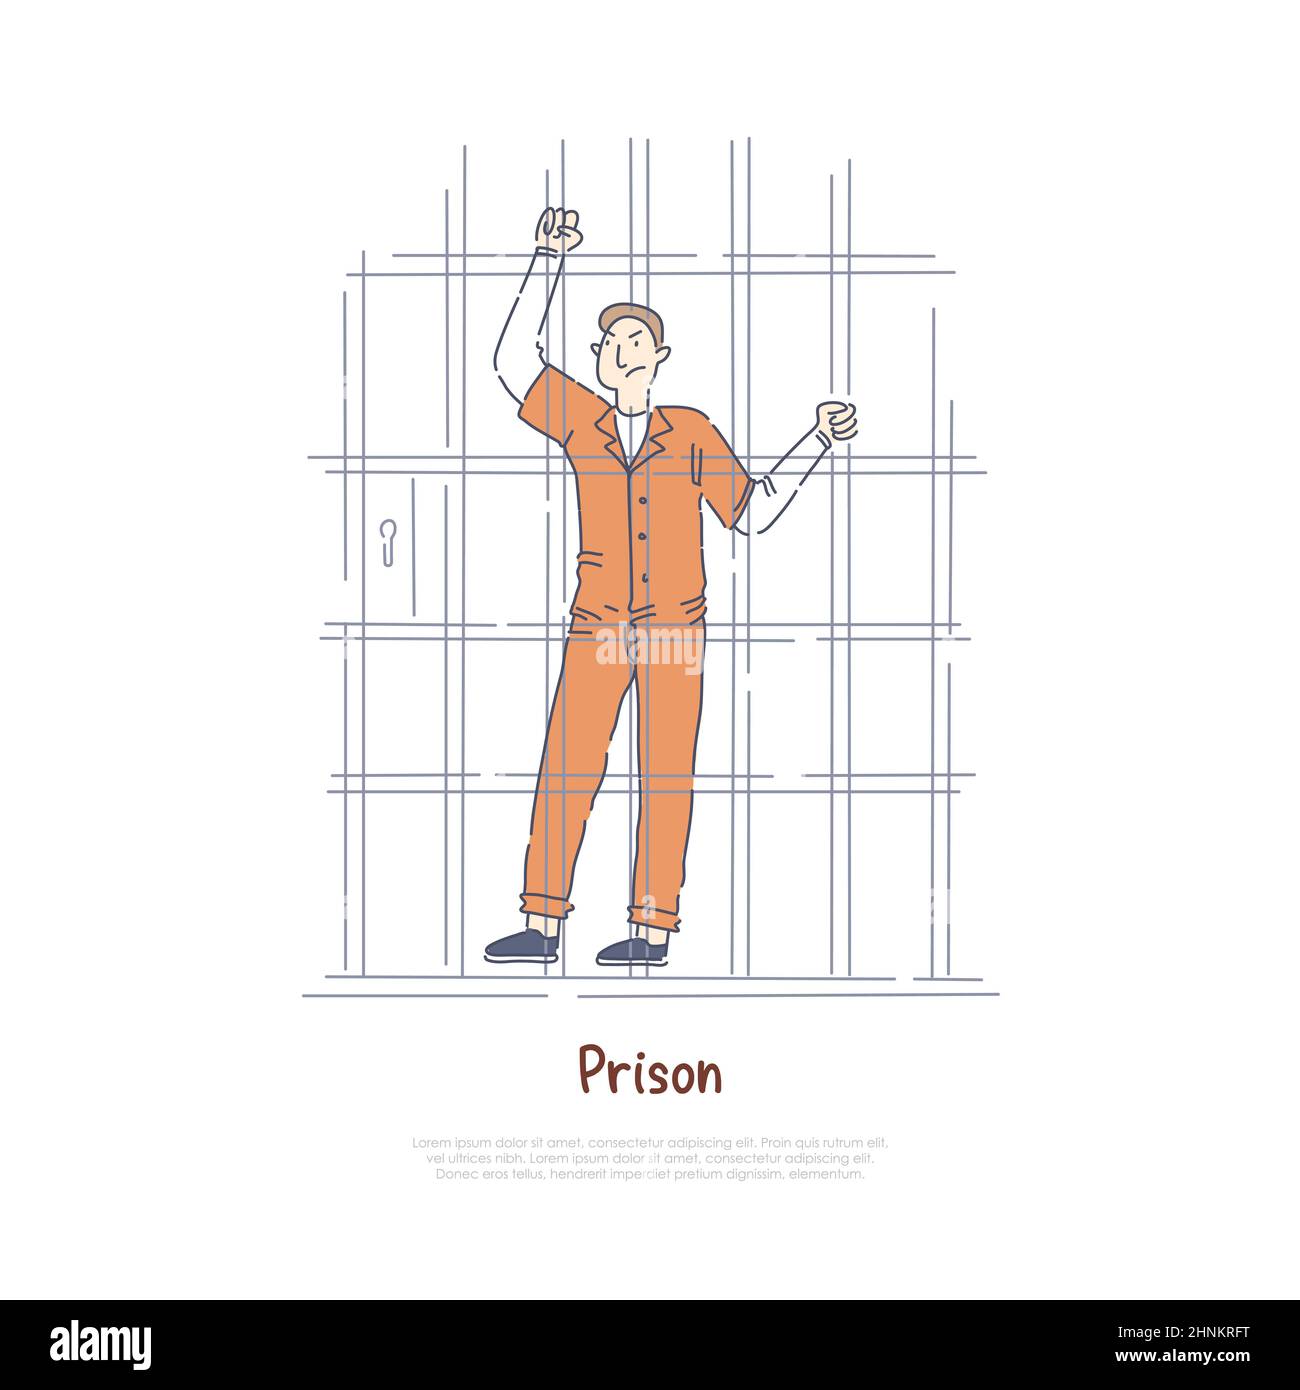 Prisoner behind bars, inmate in jail cell, sentenced man in orange jumpsuit, criminal imprisonment banner. Penitentiary, justice and punishment concep Stock Photo